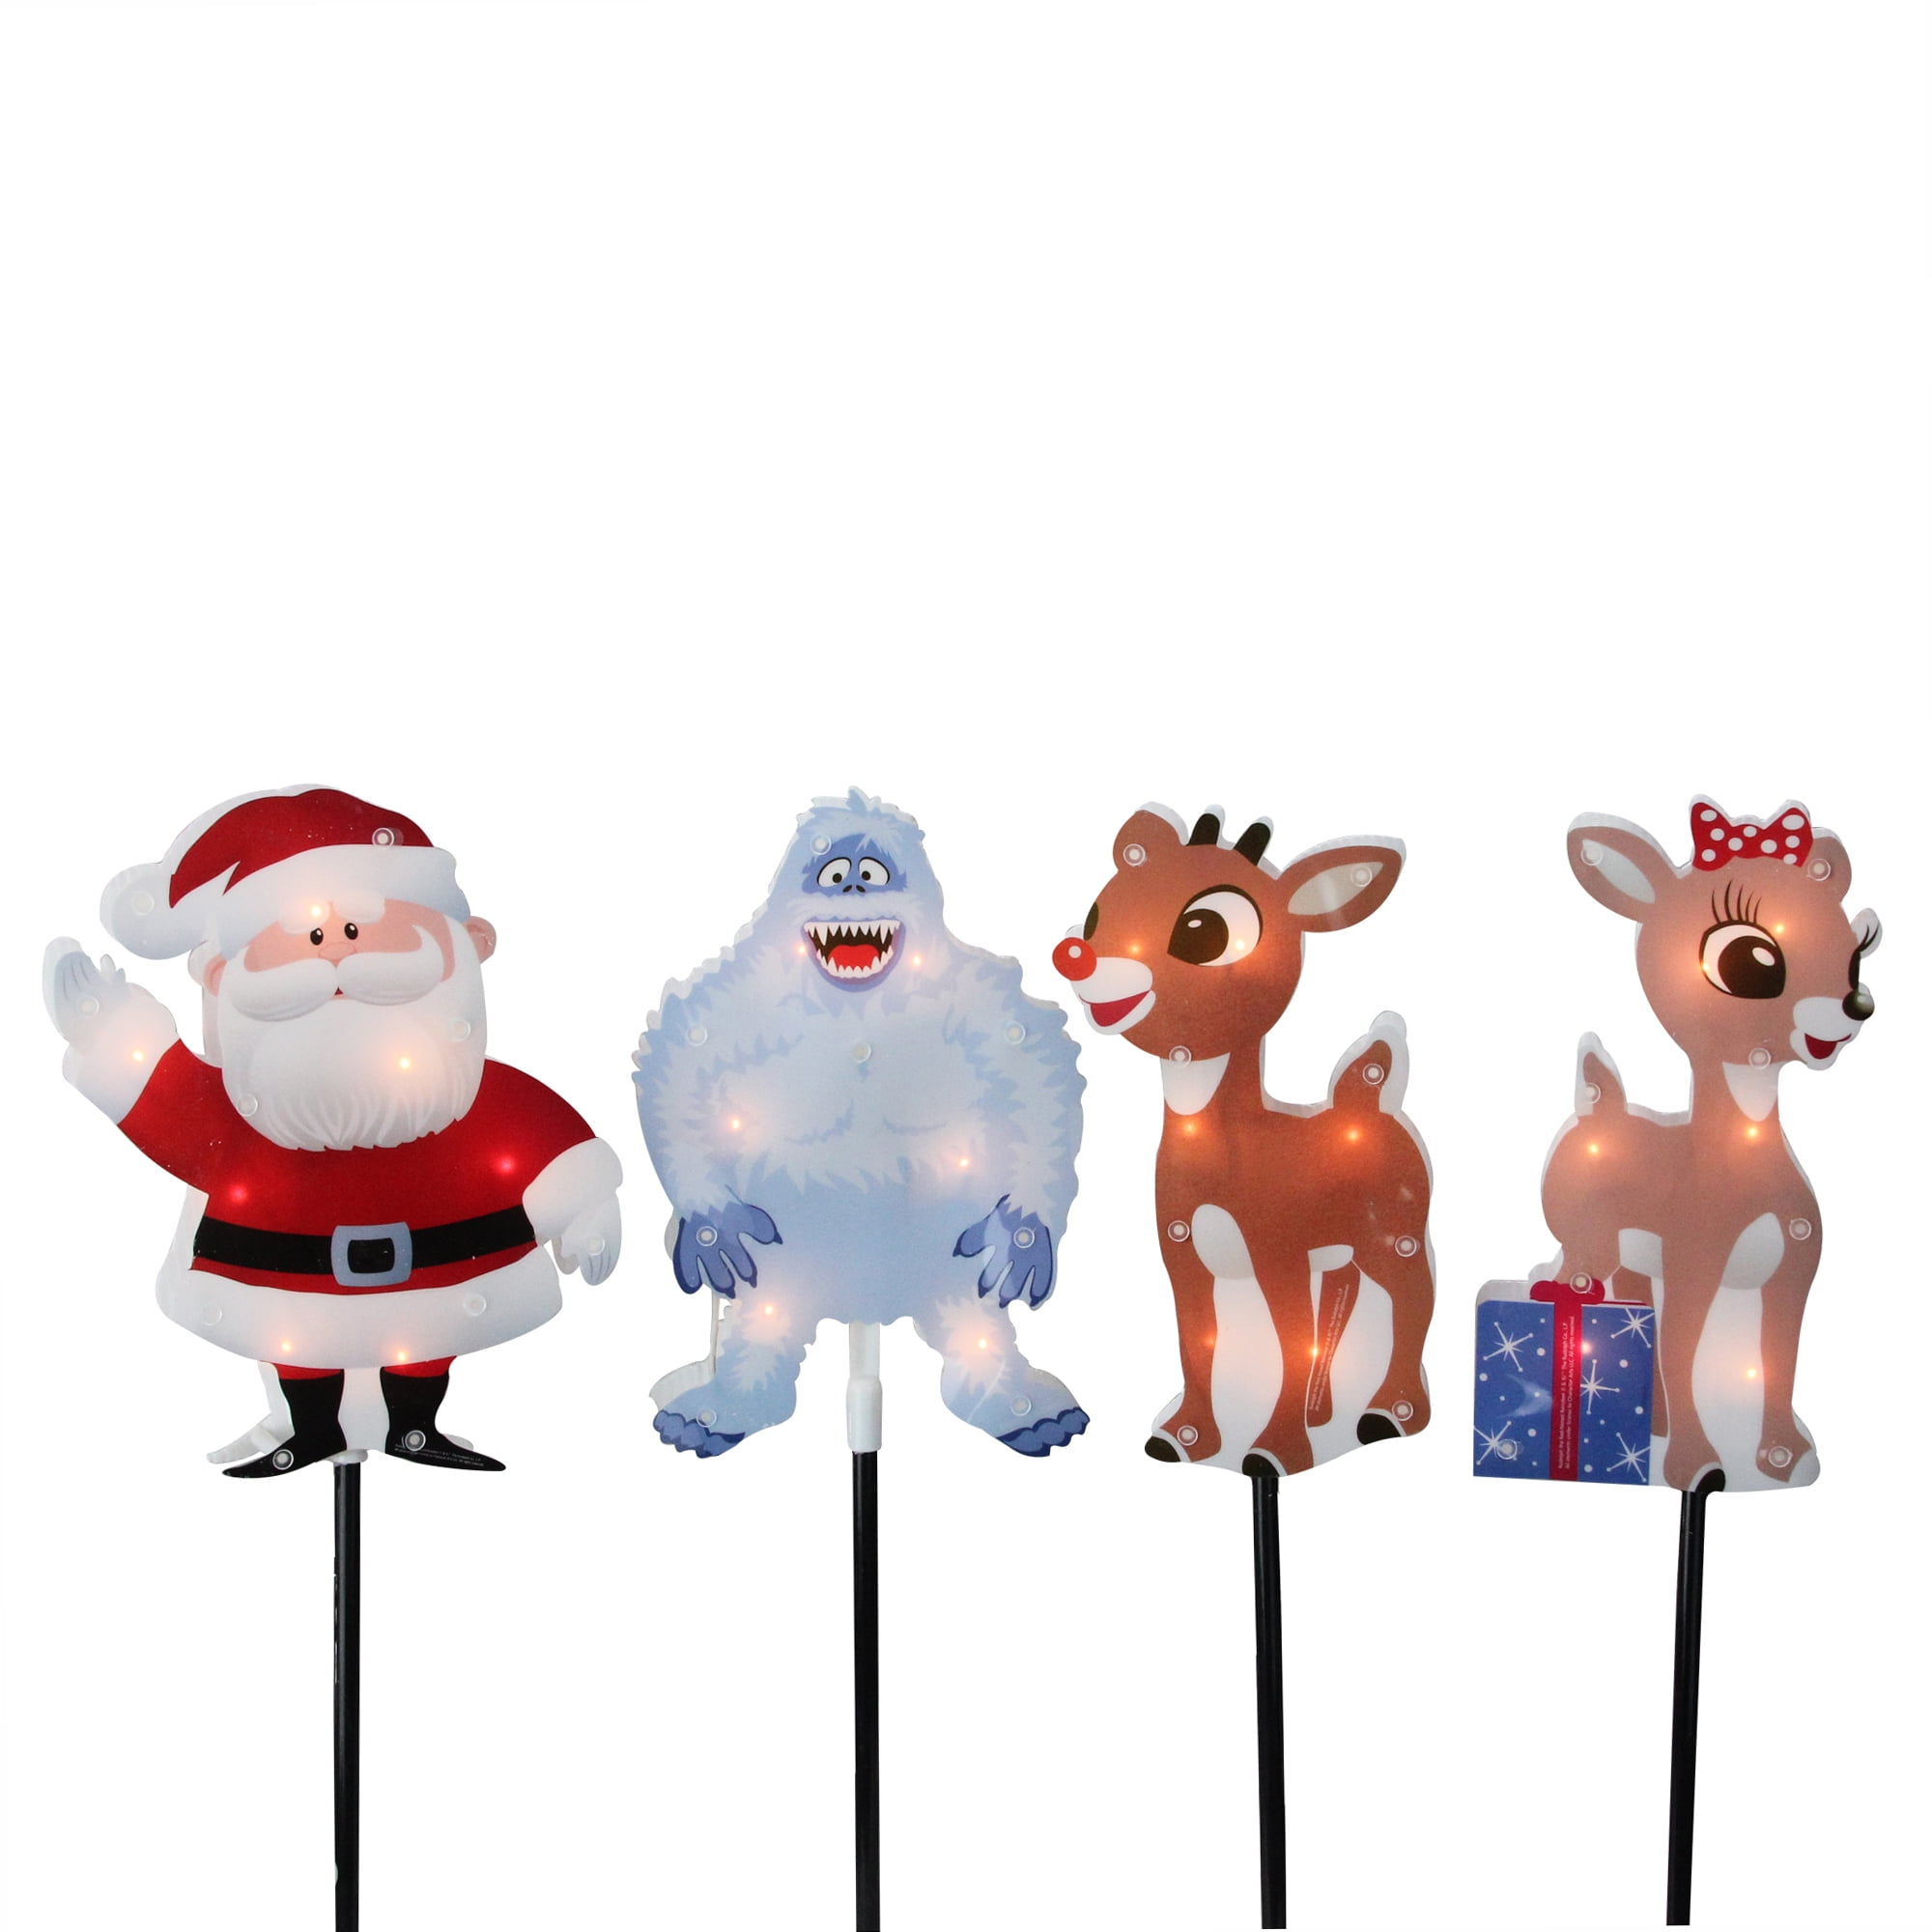 15 Pre-lit Rudolph The Red Nosed Reindeer Clarice Christmas Outdoor Decoration Clear Lights 